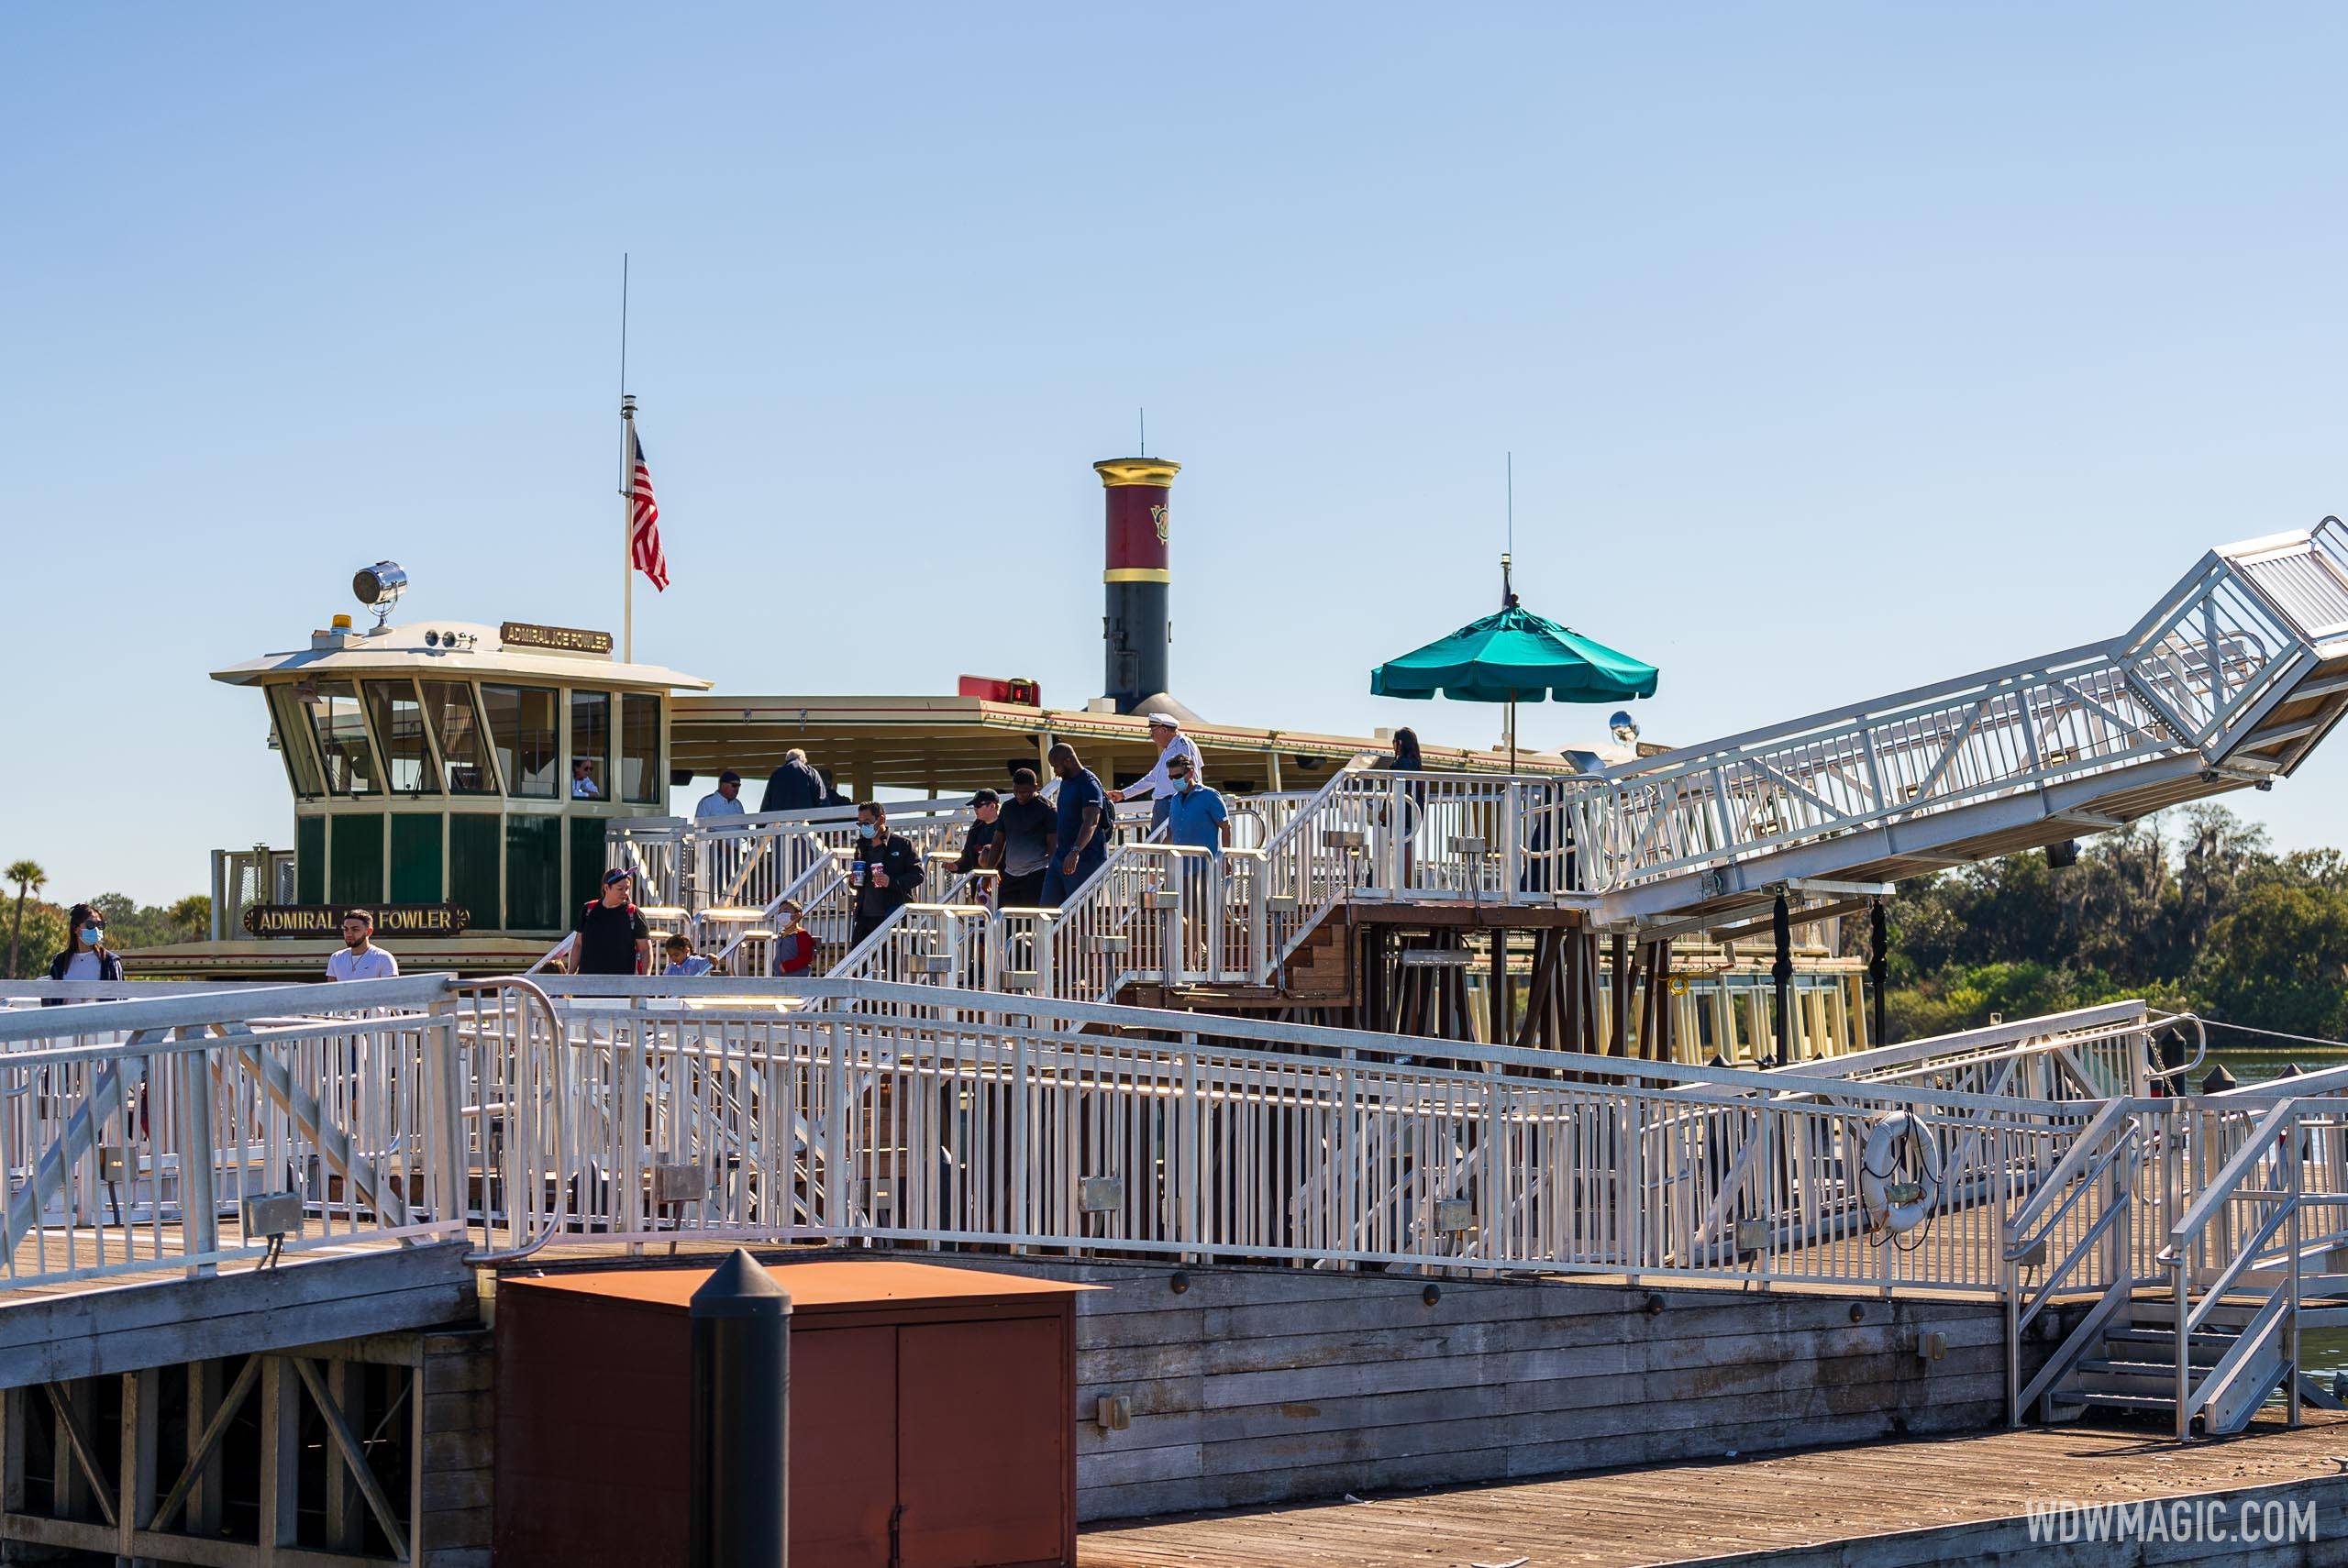 Second level access in use at Magic Kingdom Ferry Boat dock